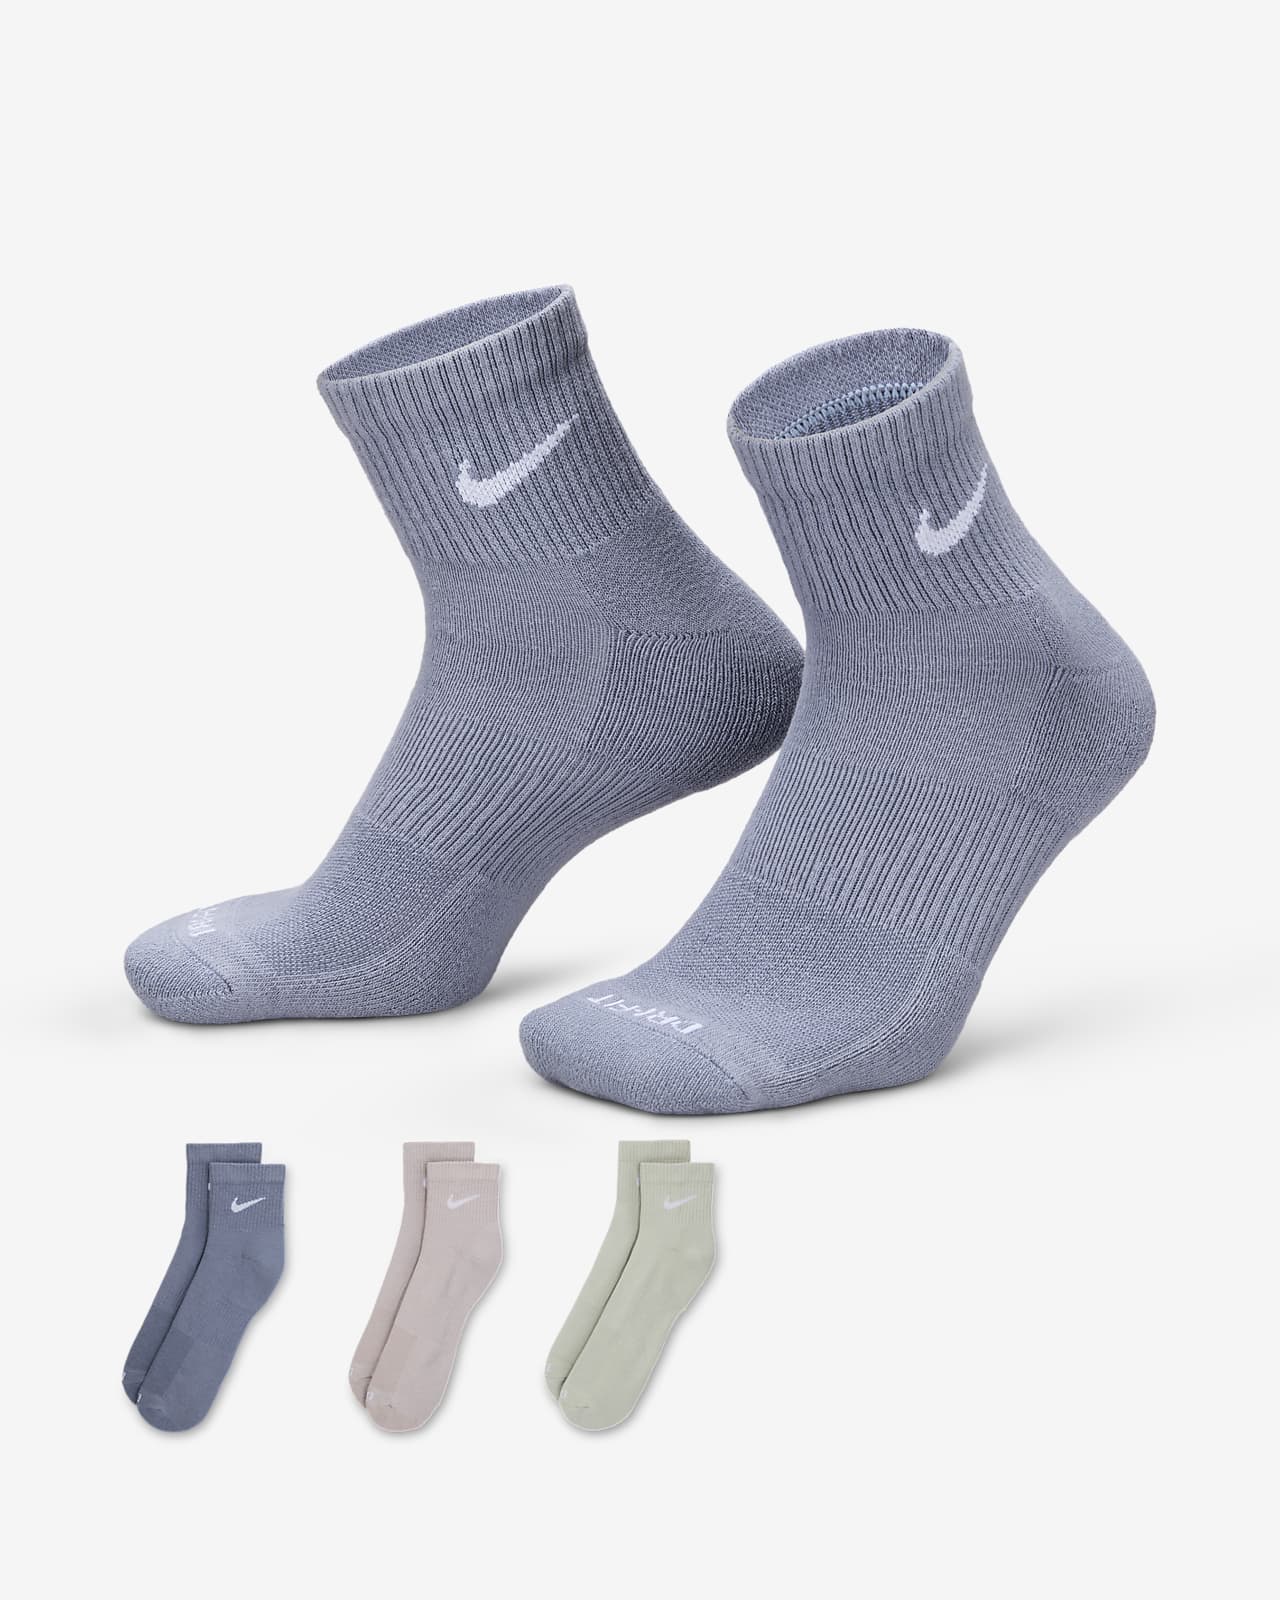 NIKE CHAUSSETTES EVERYDAY PLUS BLANC/MULTICOLORE - CHAUSSETTE